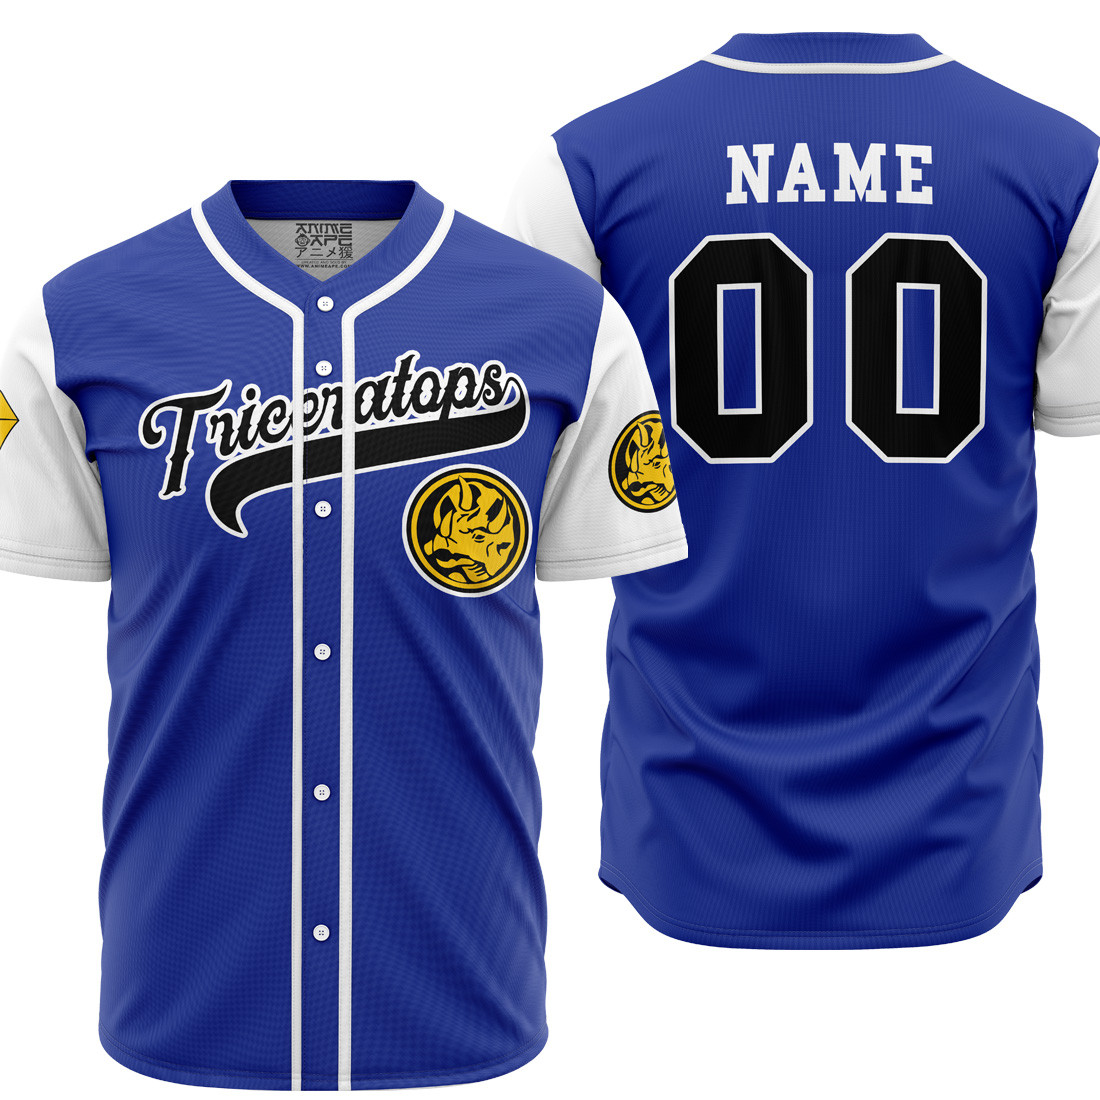 Personalized Triceratops Blue Power Rangers Baseball Jersey